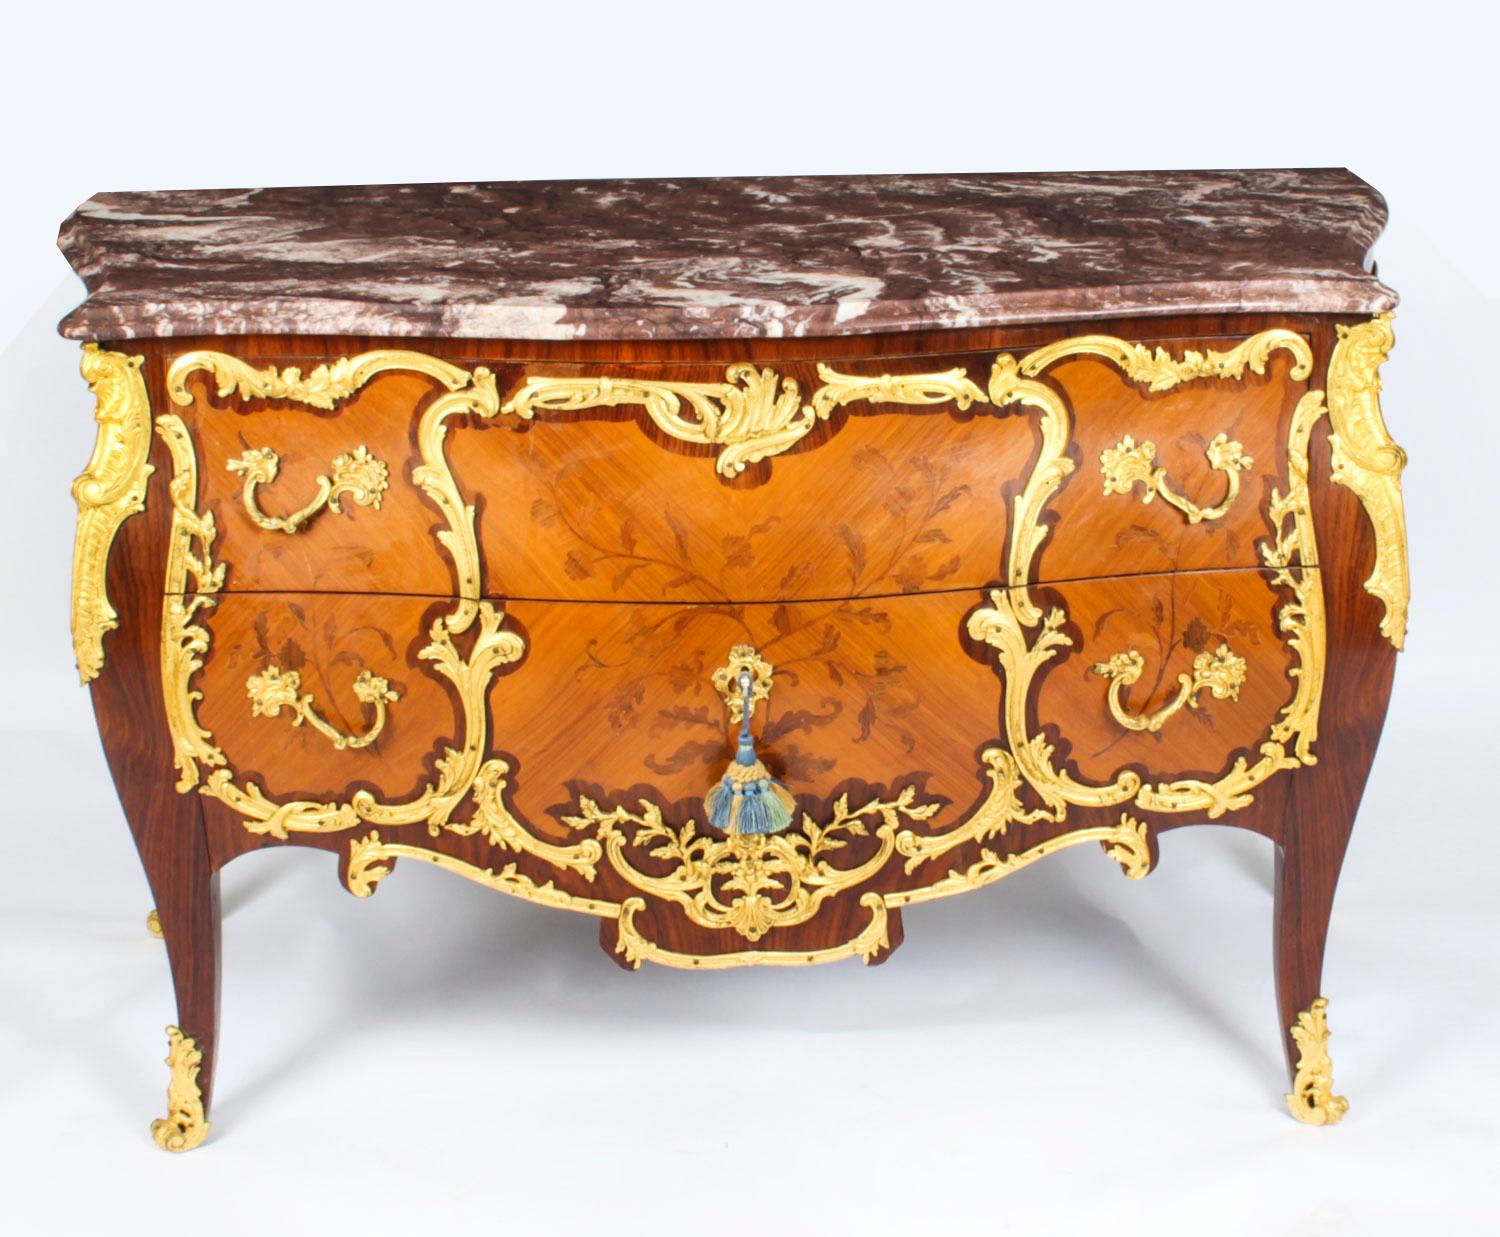 This is a beautiful antique French Louis XV Revival amaranth ormolu mounted commode, in the manner of Leonard Boudin, dating from the early 20th Century.
The two drawer commode with its fabulous rouge veined marble top features elaborate foliate